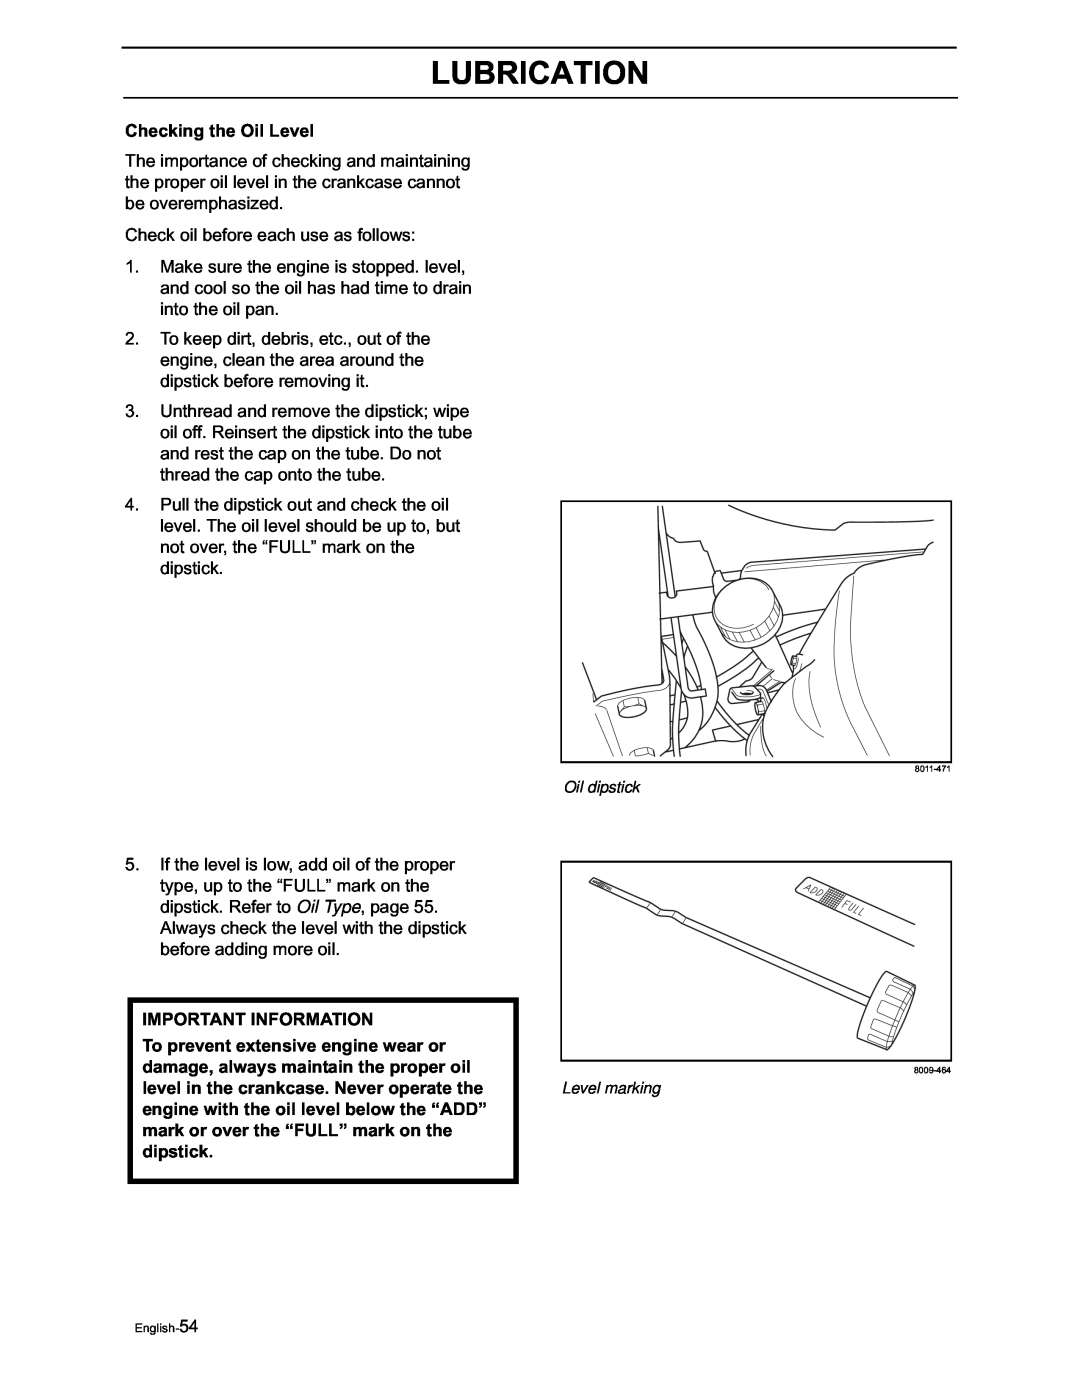 Yazoo/Kees ZVKW52253, ZVKH61273 manual Lubrication, Checking the Oil Level, Important Information 